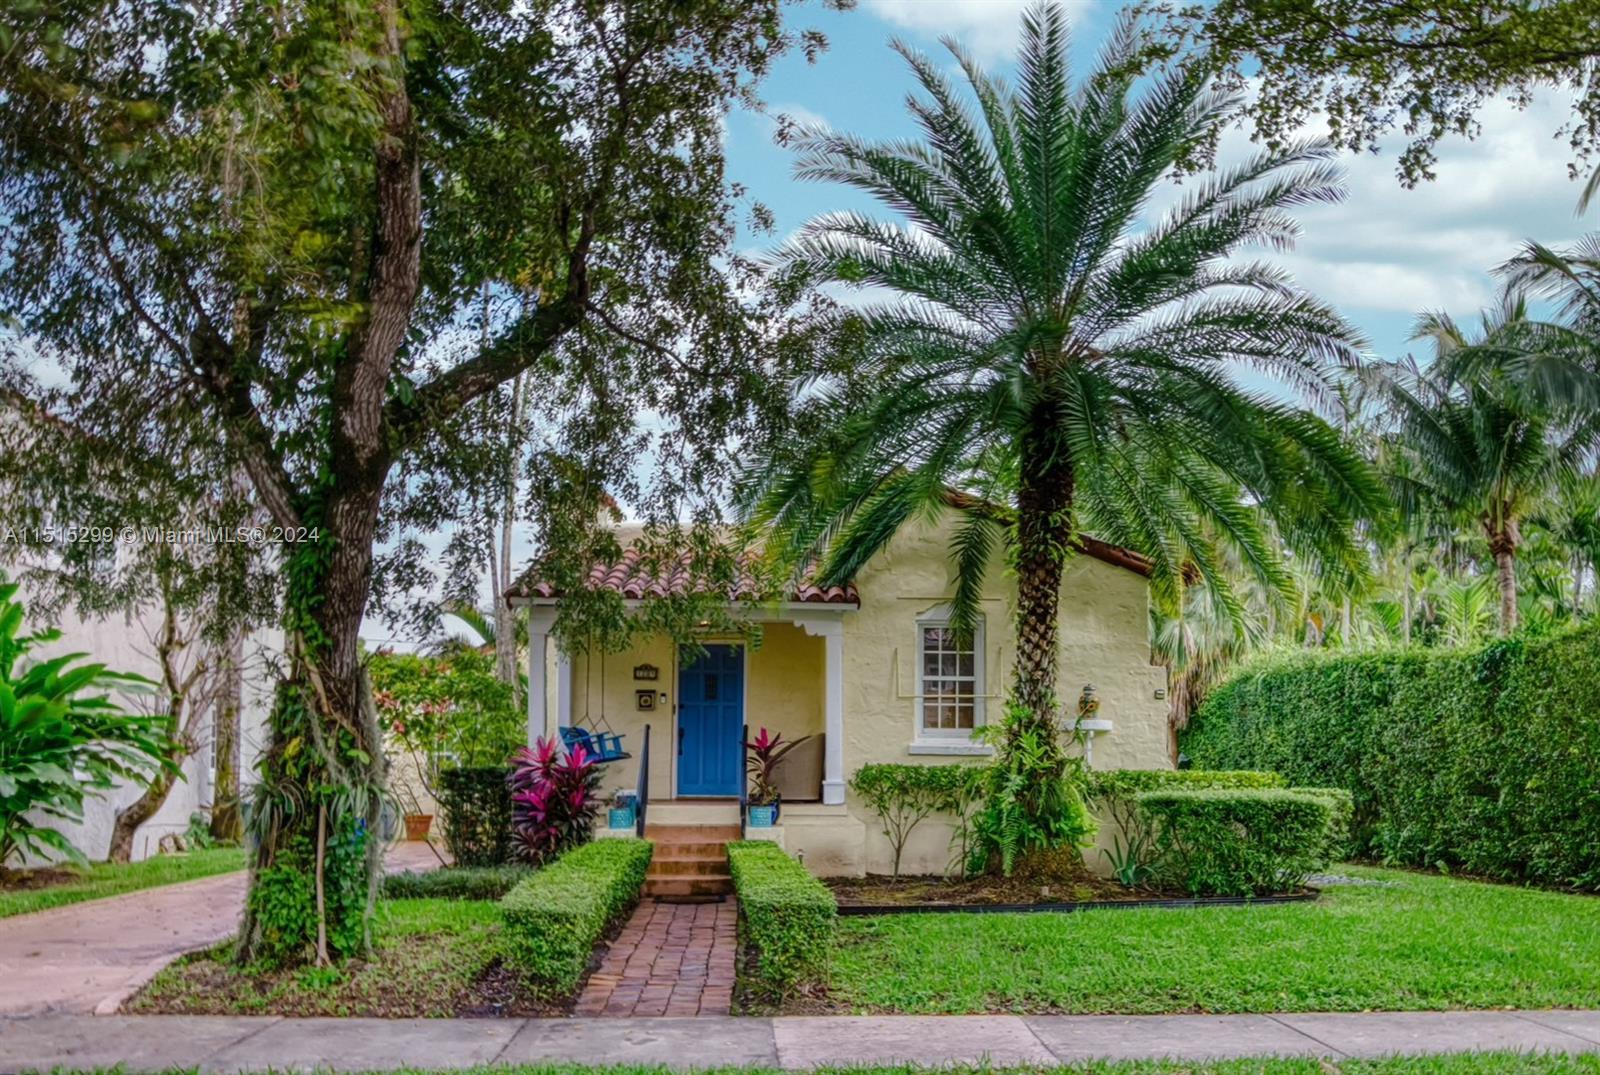 Photo of 1209 Ferdinand St in Coral Gables, FL